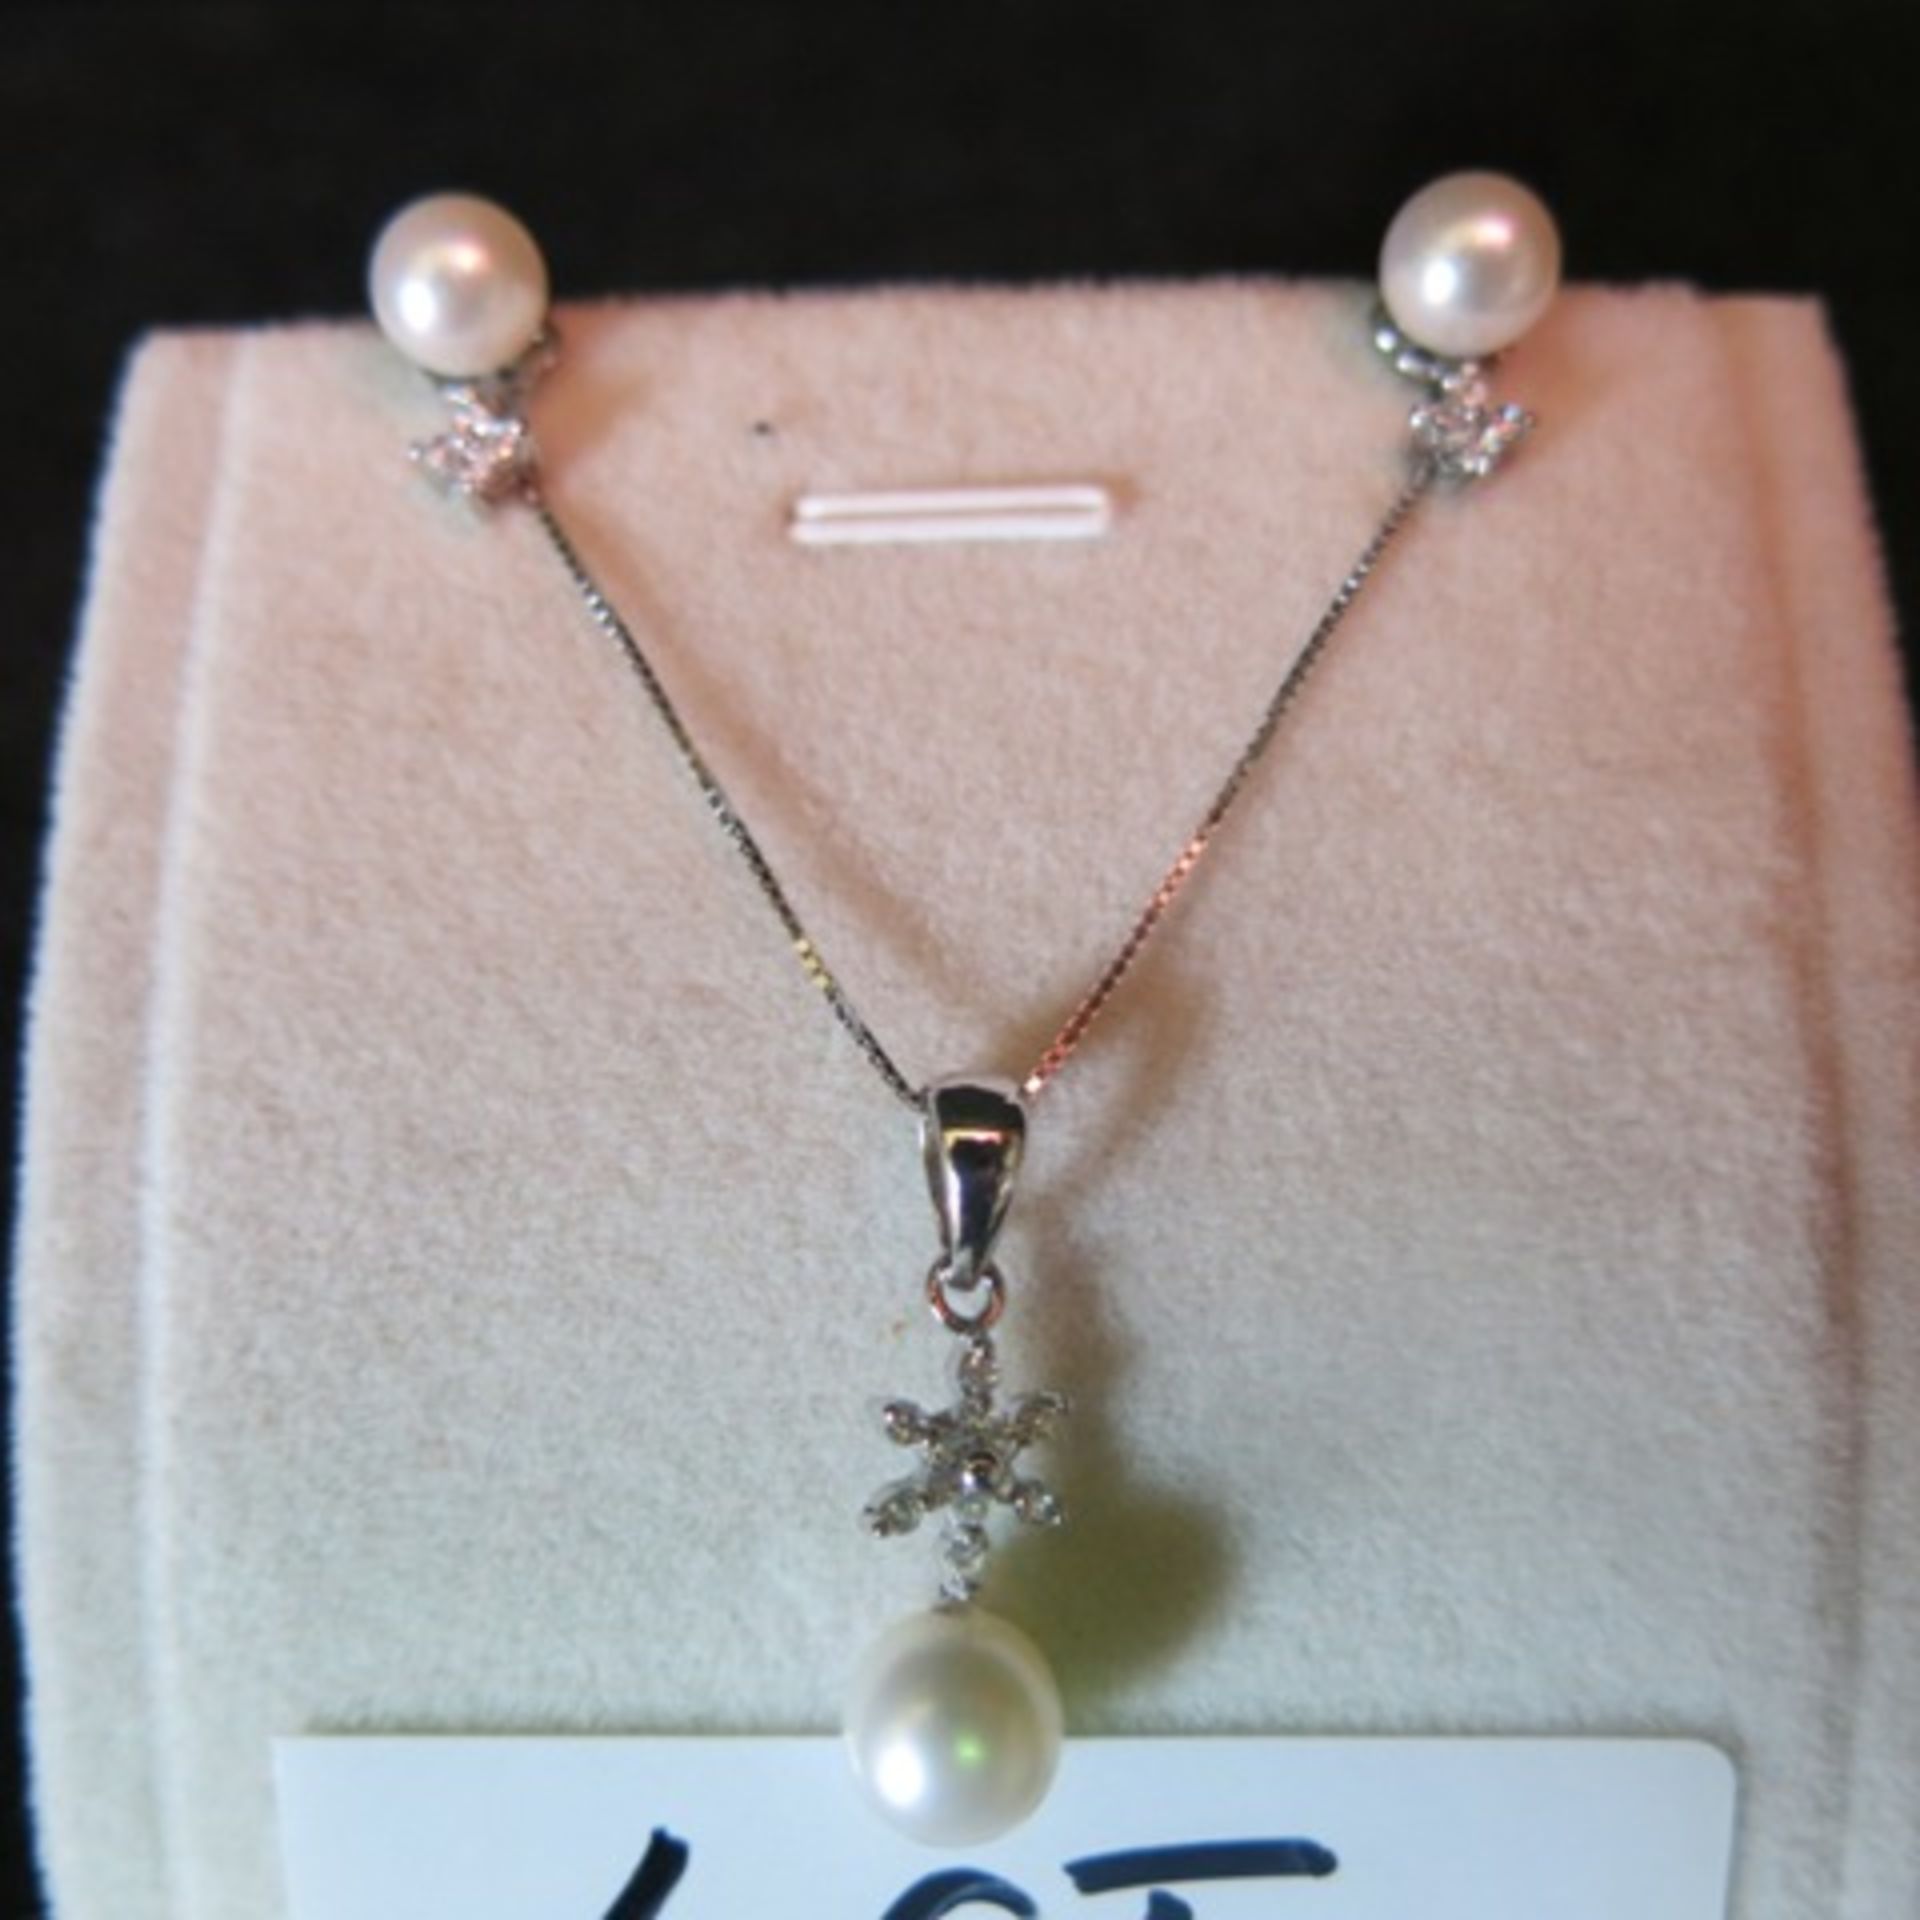 Pearl Necklace A/F & Ear Ring Set, White Metal Star Motif with CZ/Clear Stones. RRP £215.00 - Image 2 of 2